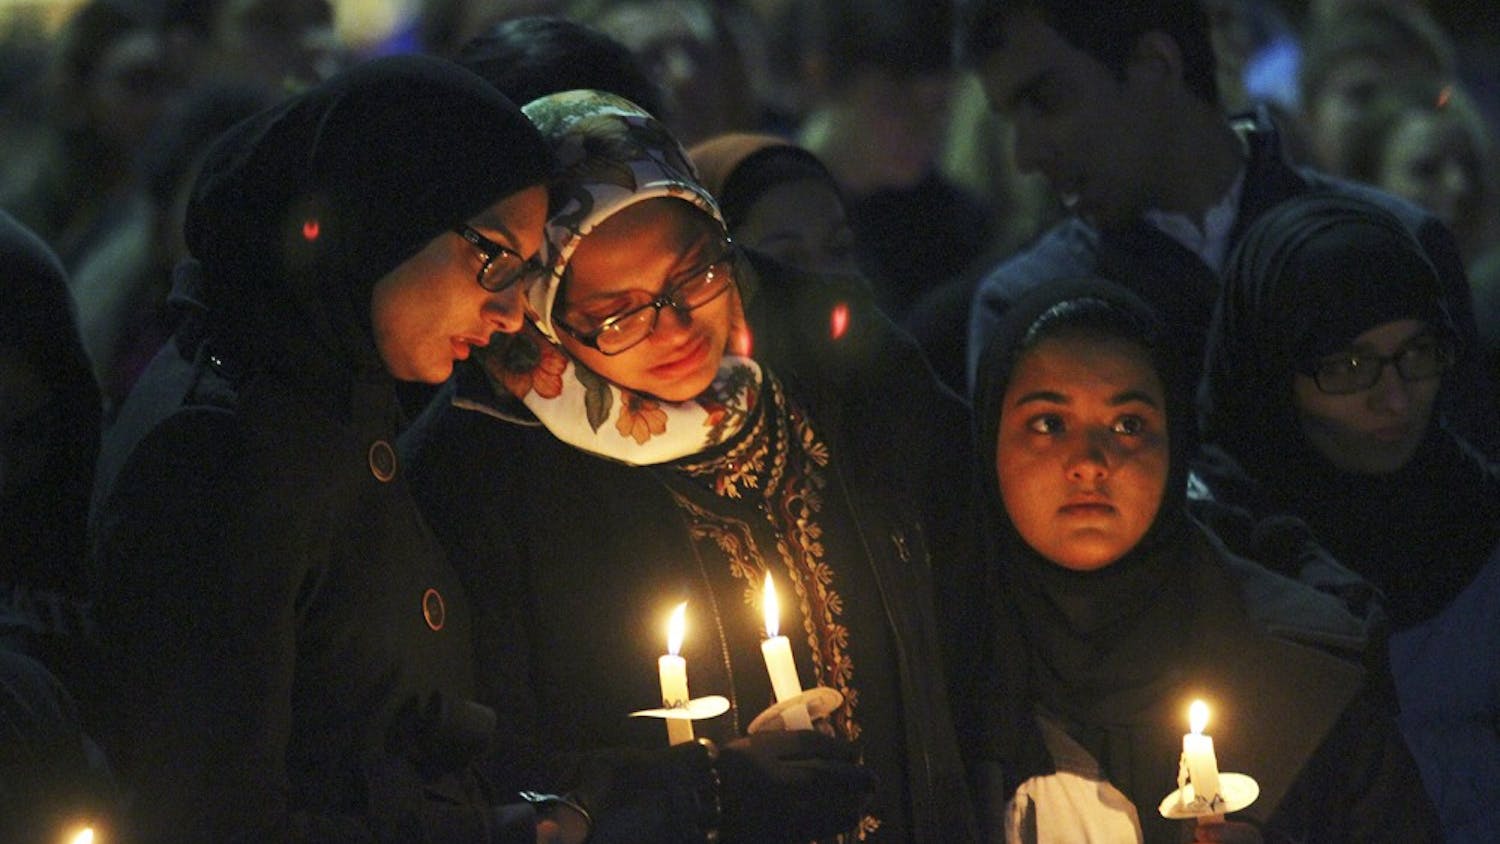 Mourners hold candles at a vigil in the Pit for Deah Shaddy Barakat, Yusor Mohammad Abu-Salha and Razan Mohammad Abu-Salha on Wednesday.